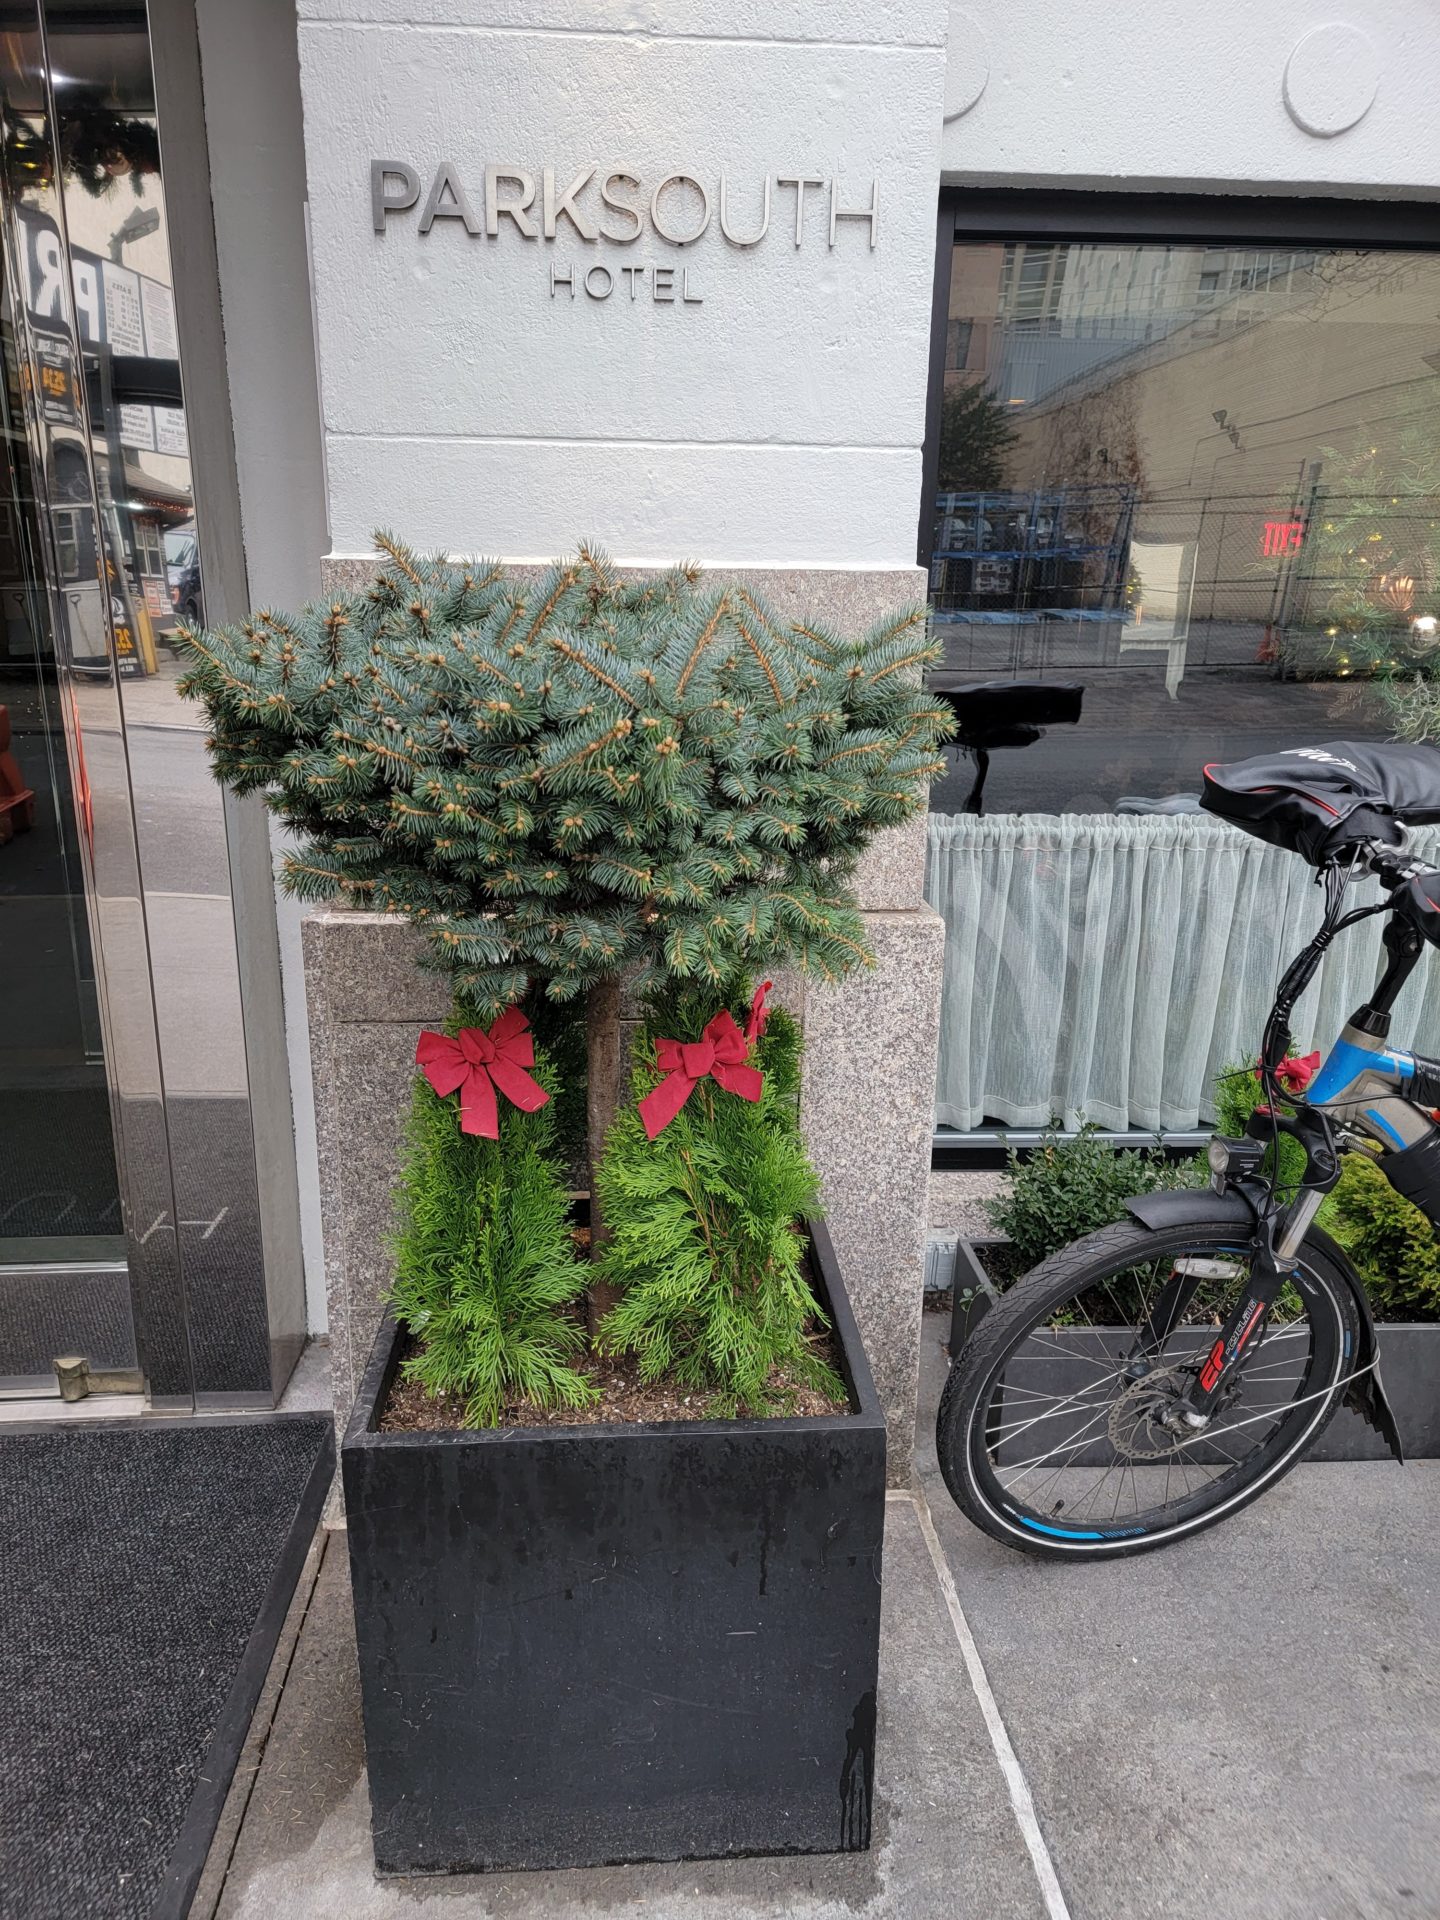 a tree with red bows in a square black container next to a bicycle